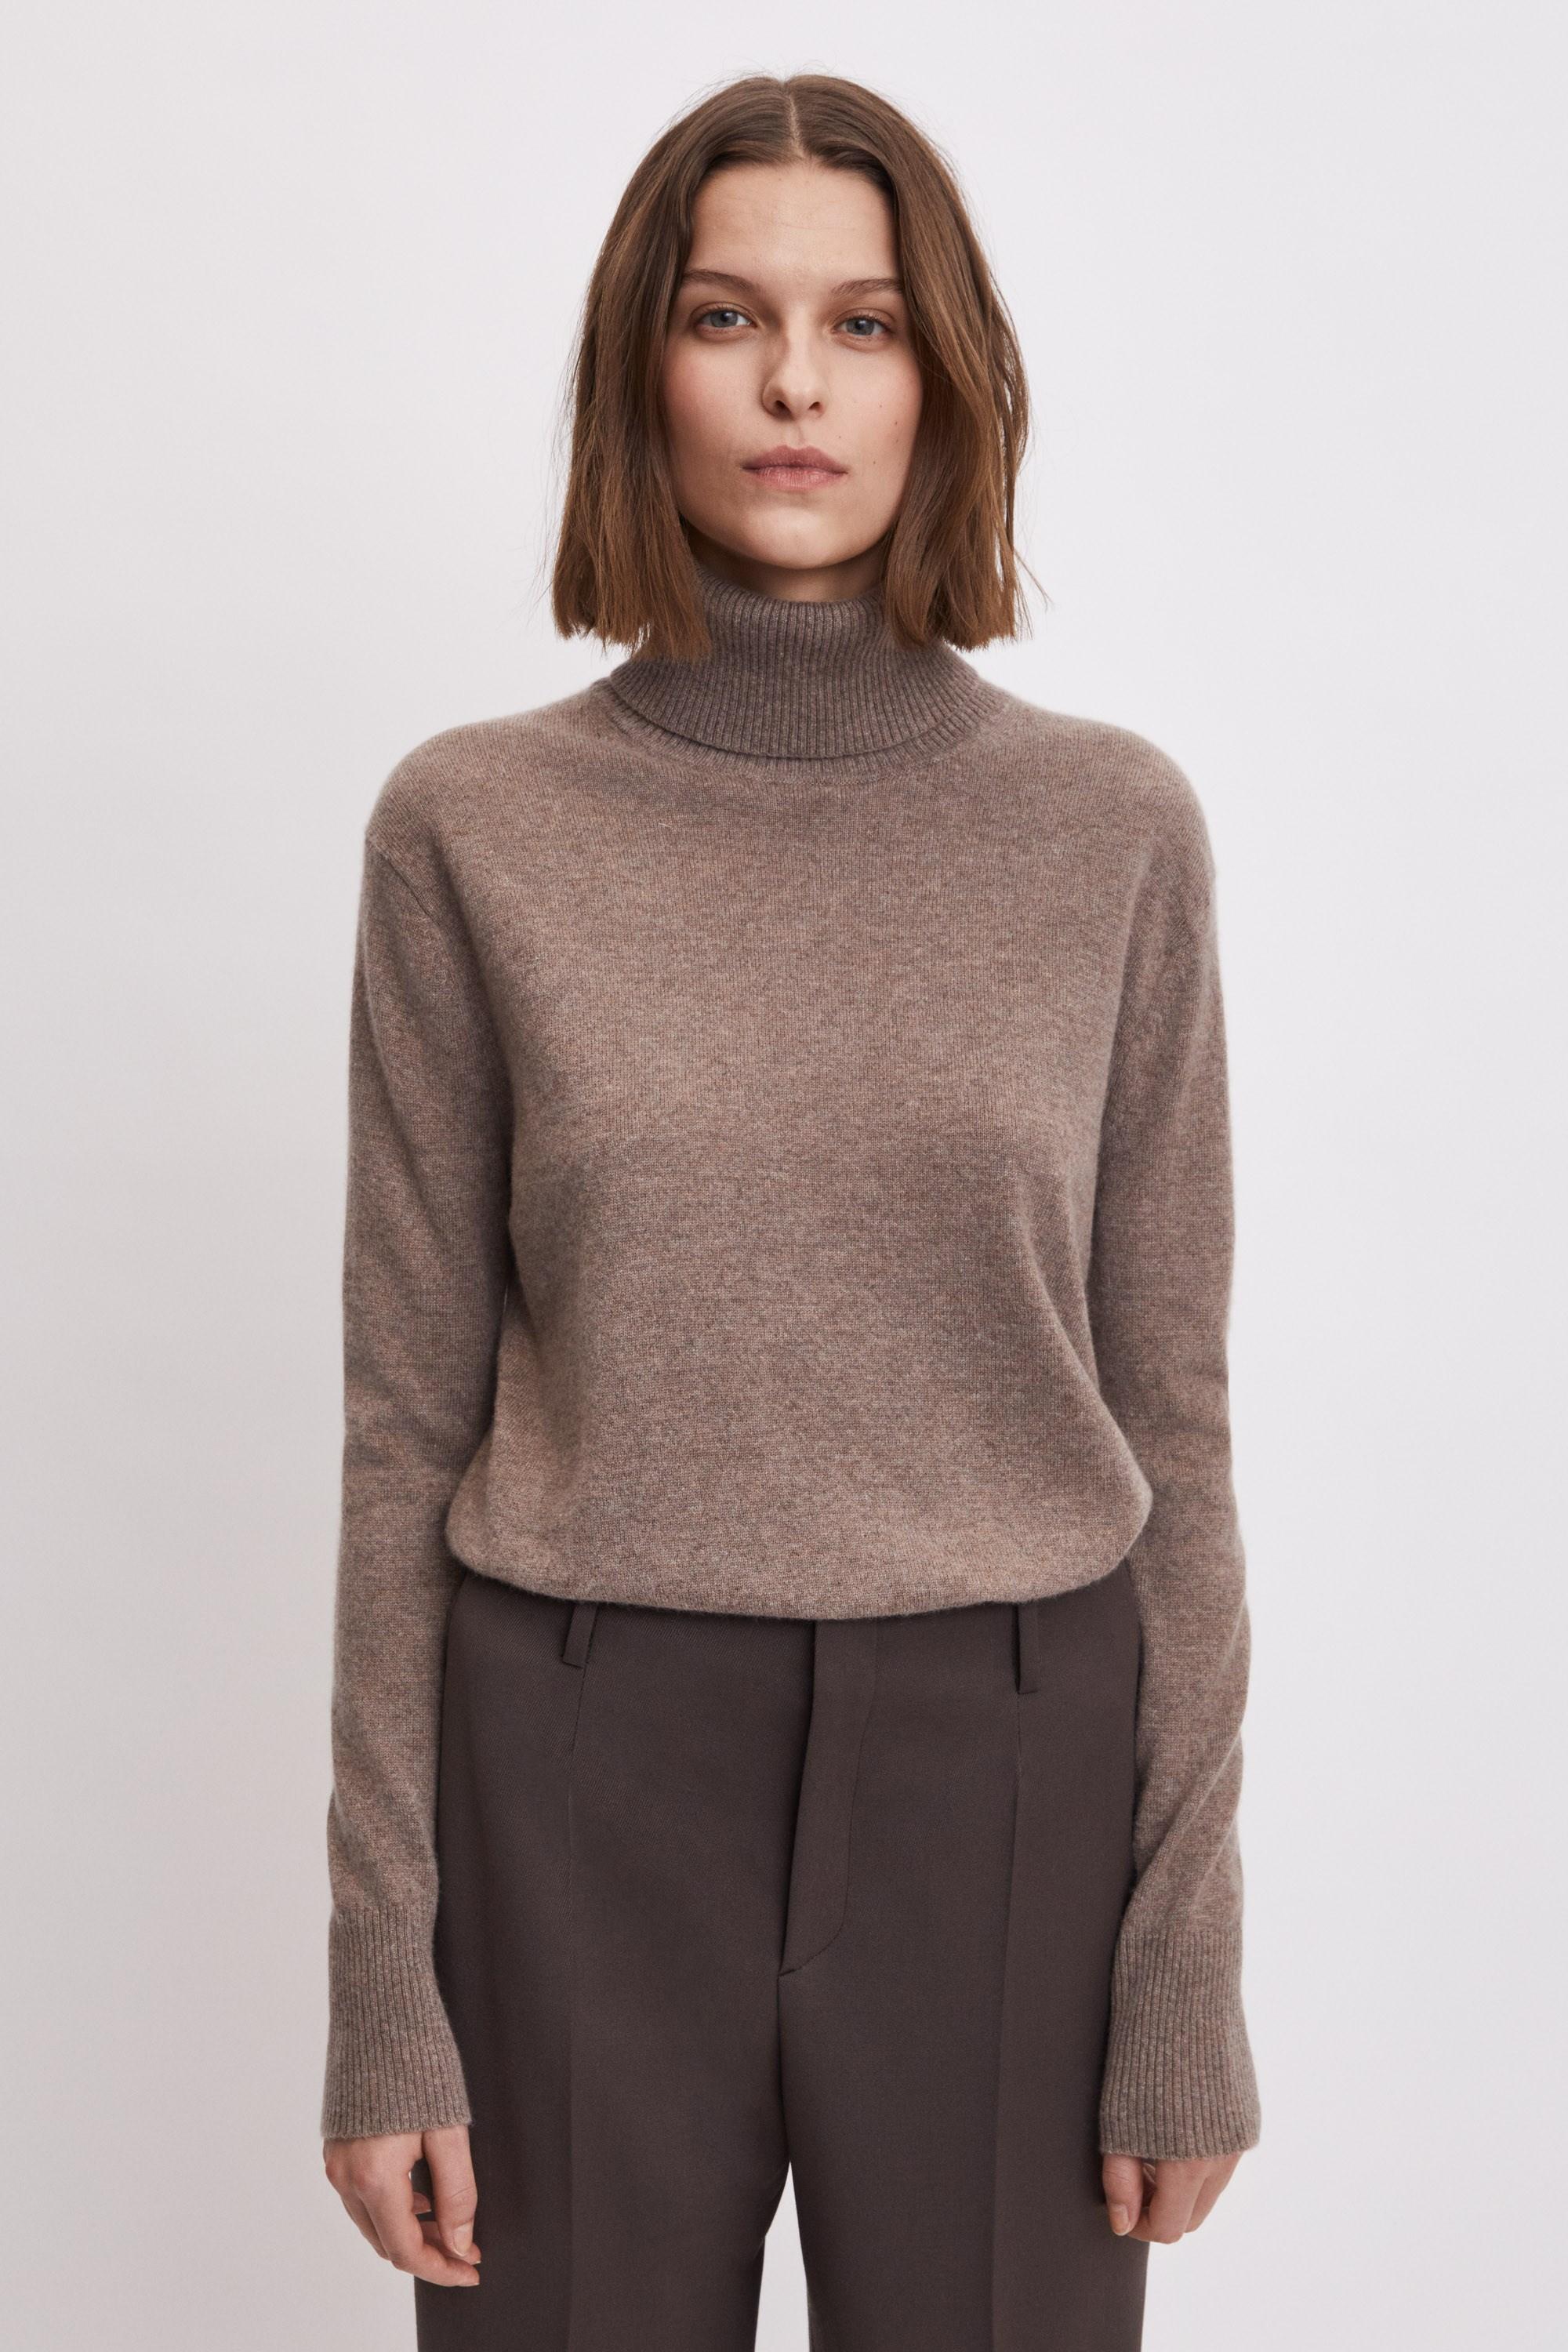 Filippa K Cashmere Roller Neck Sweater in Taupe (Brown) - Lyst